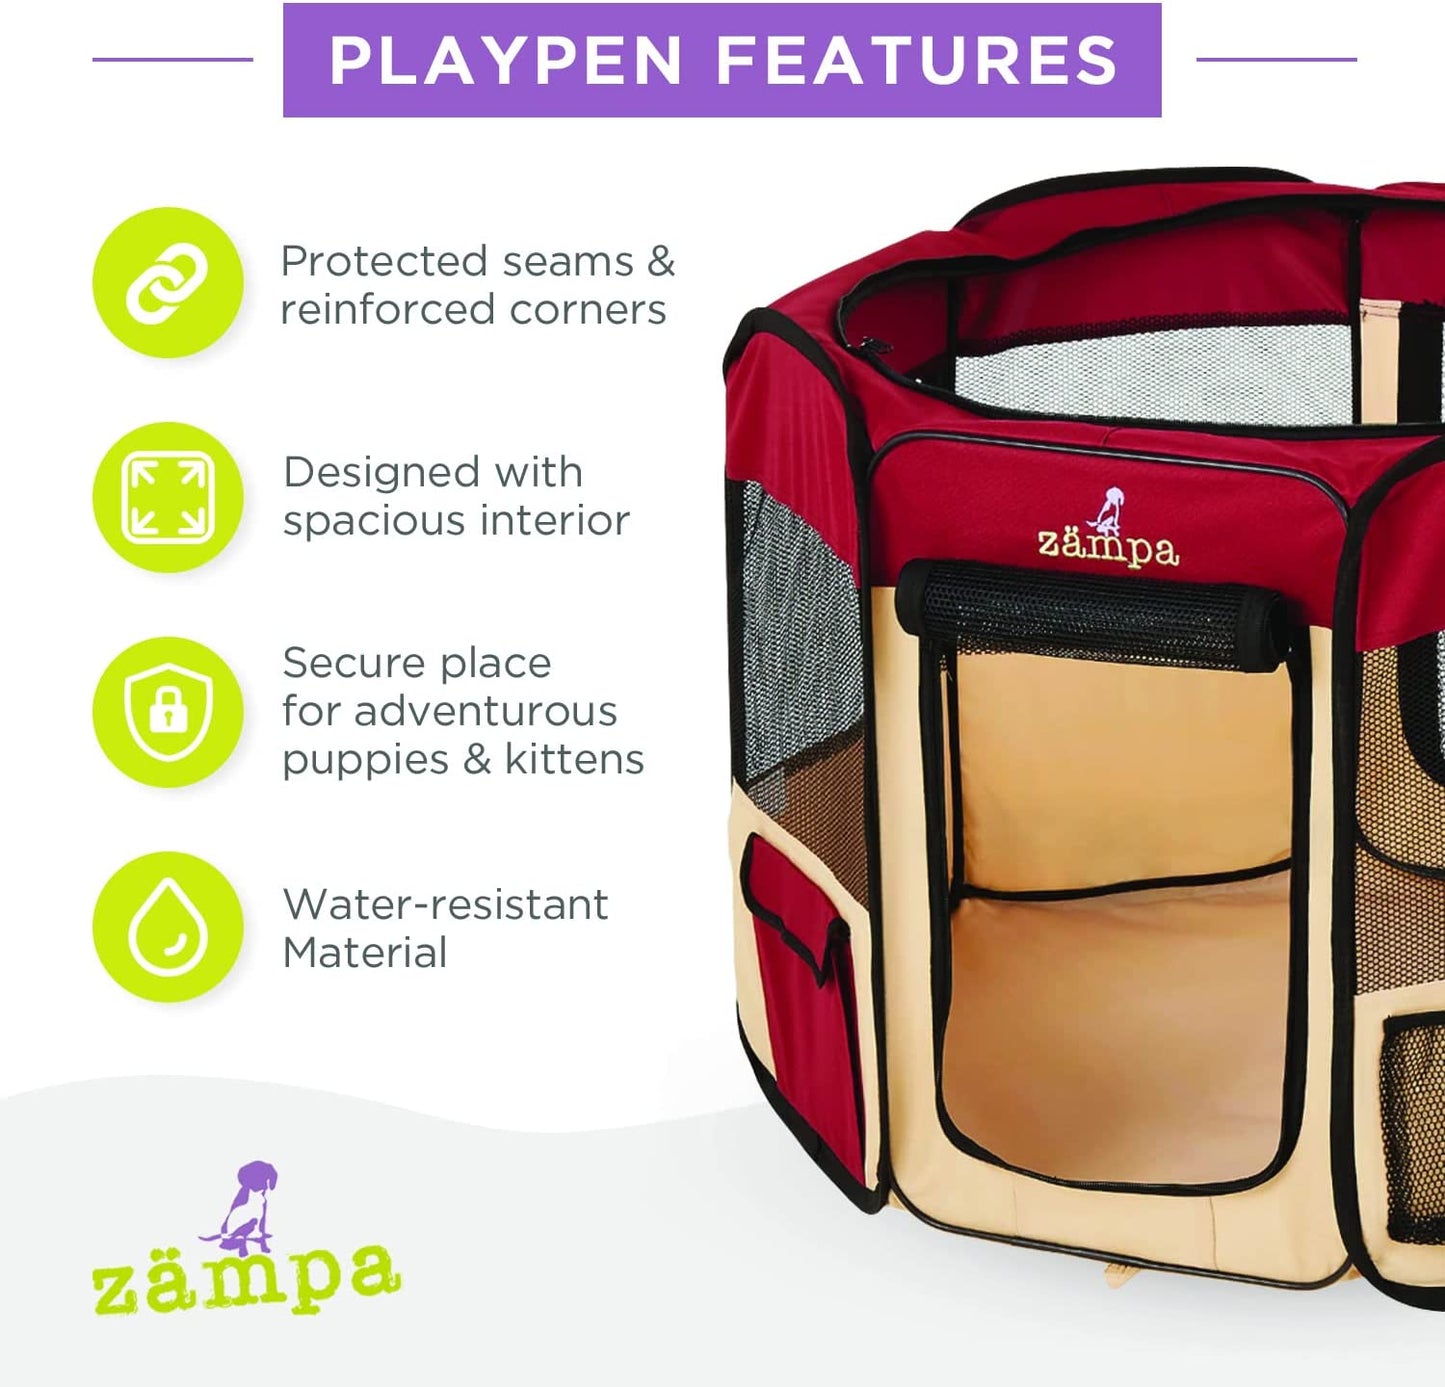 Portable Foldable Pet Playpen Exercise Pen Kennel + Carrying Case for Larges Dogs Small Puppies/Cats | Indoor/Outdoor Use | Water Resistant